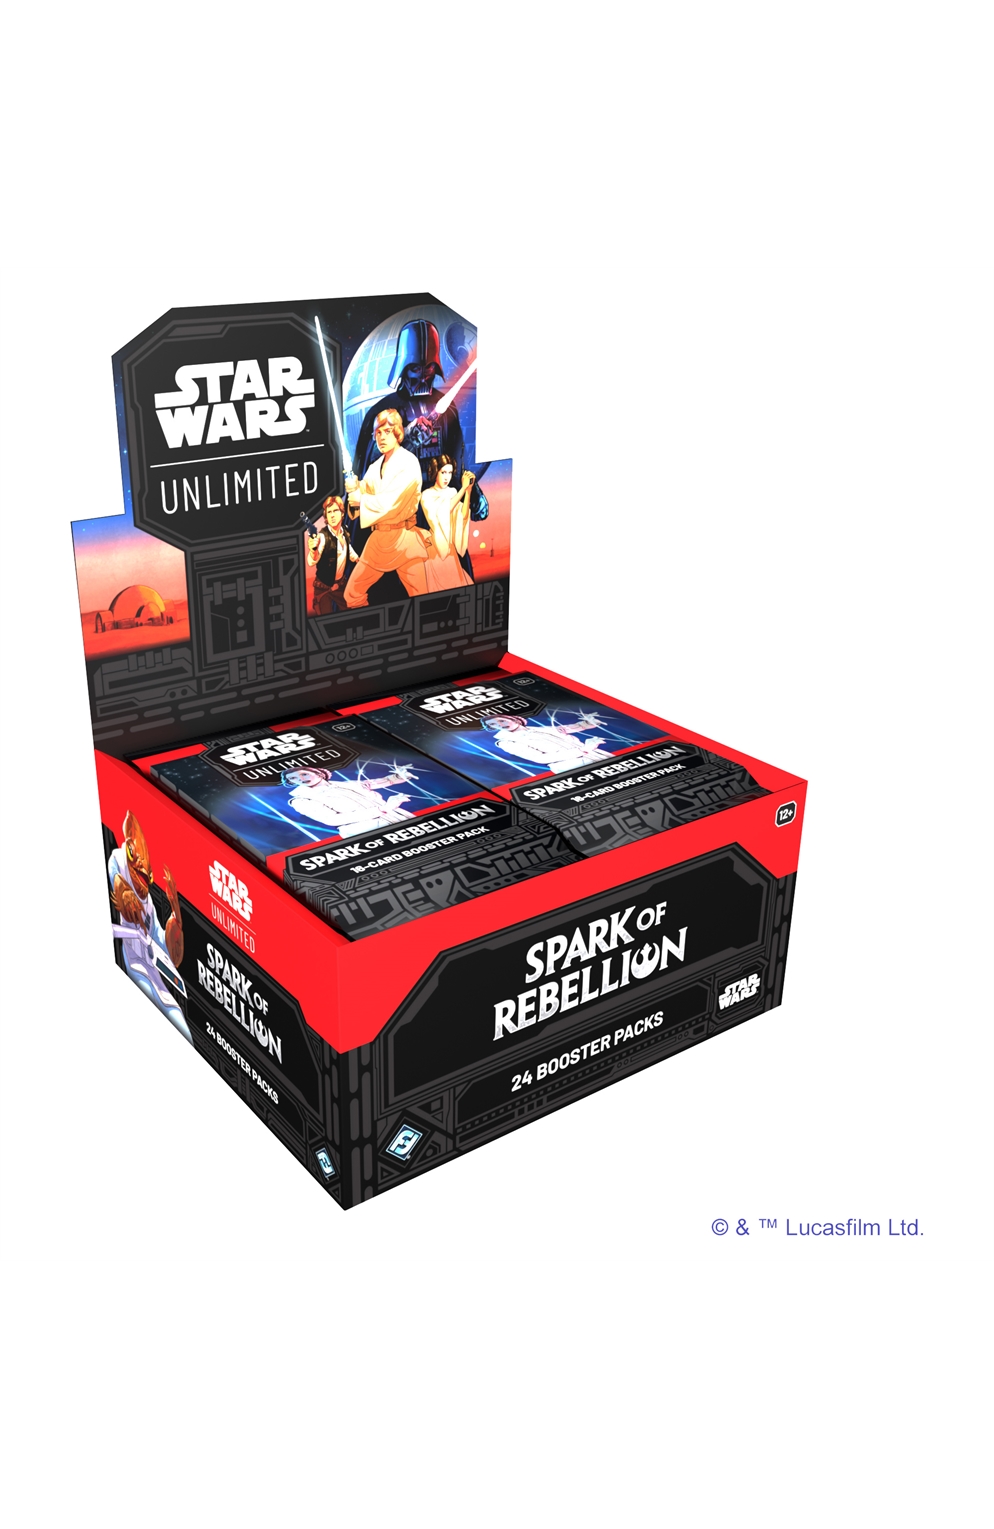 Star Wars: Unlimited Tcg: Spark of Rebellion Draft Booster Display (24)